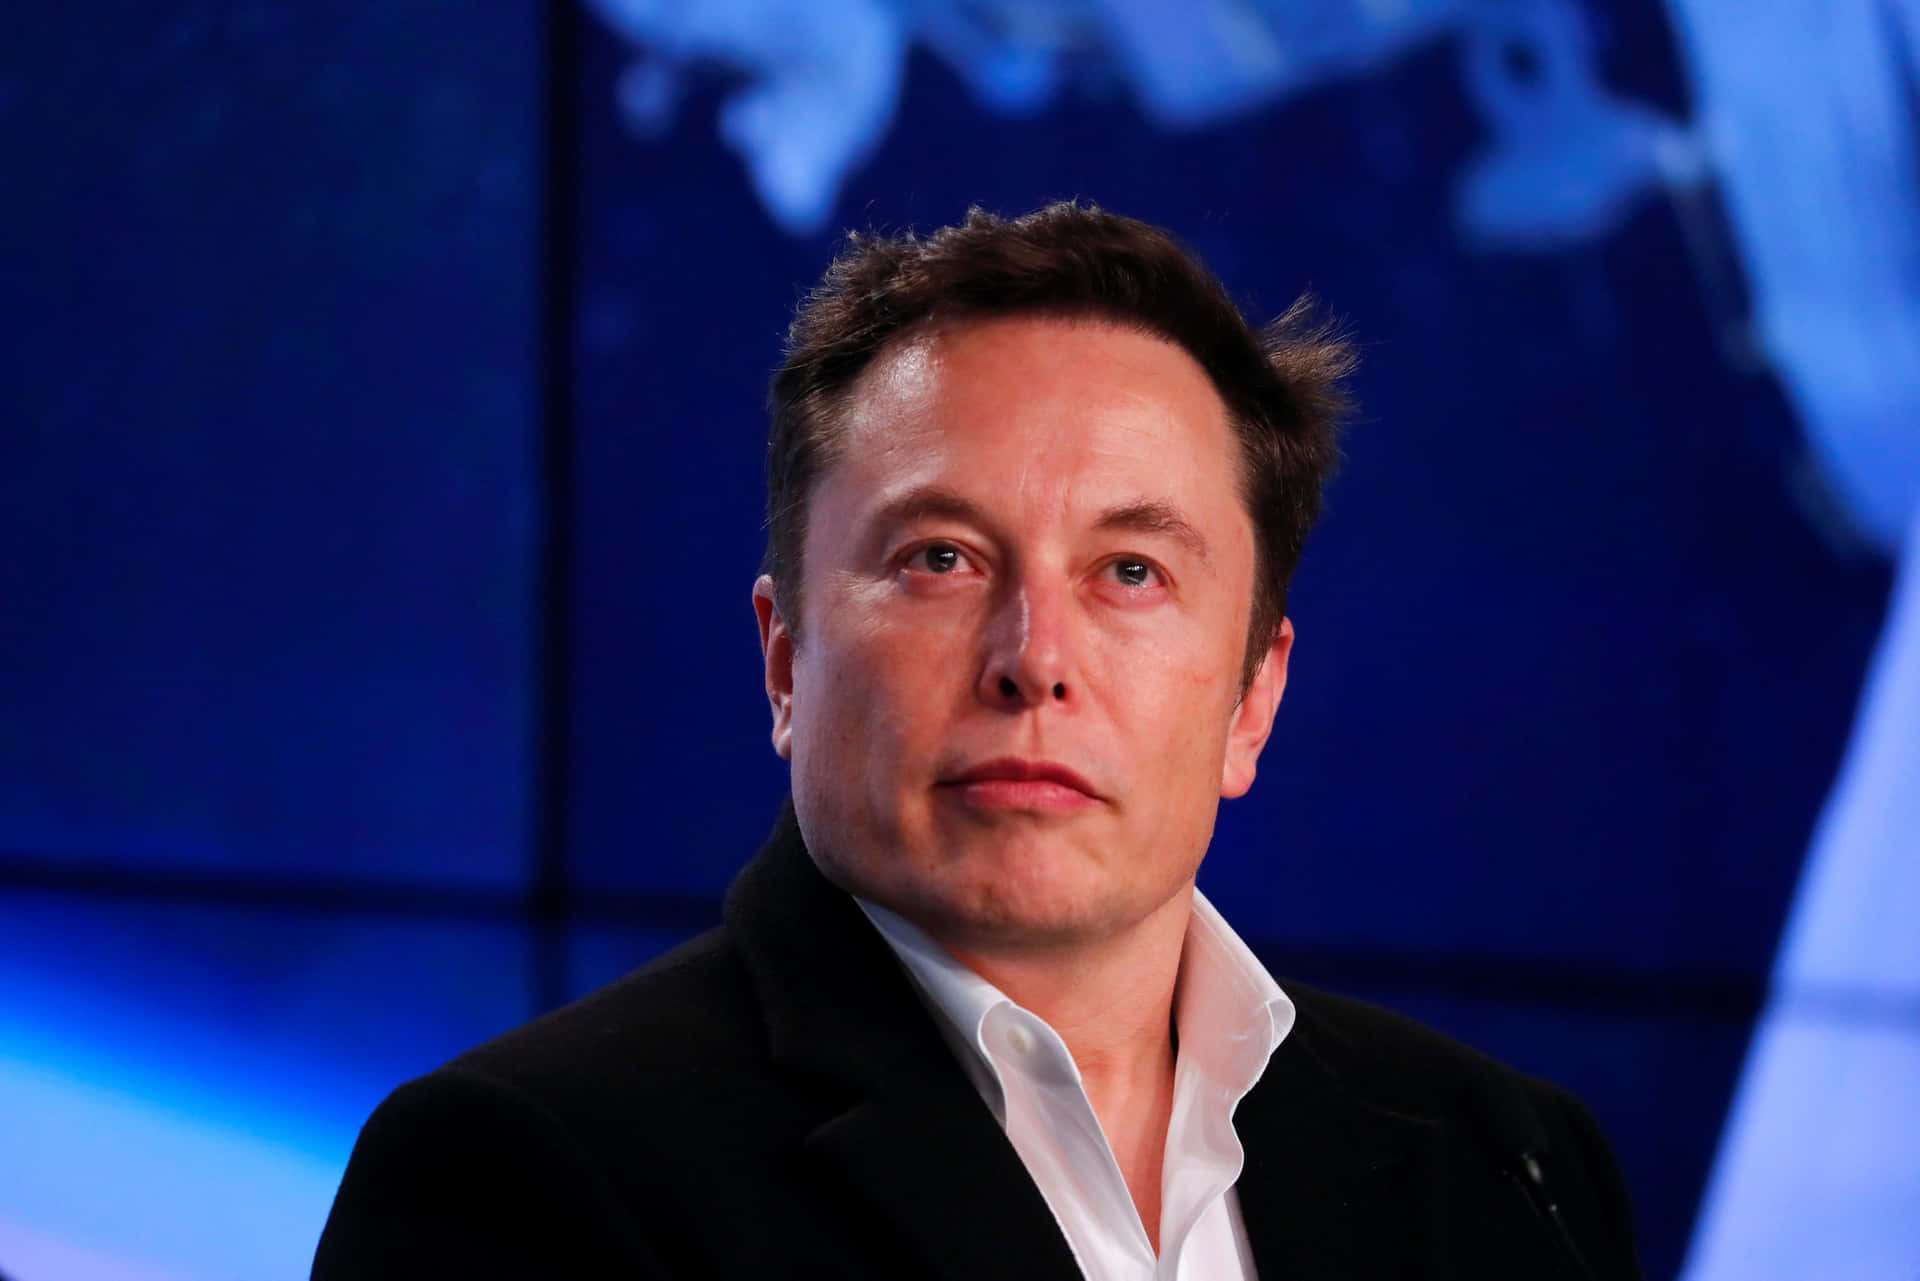 "The World is Not Ready for What Elon Musk Has in Store"